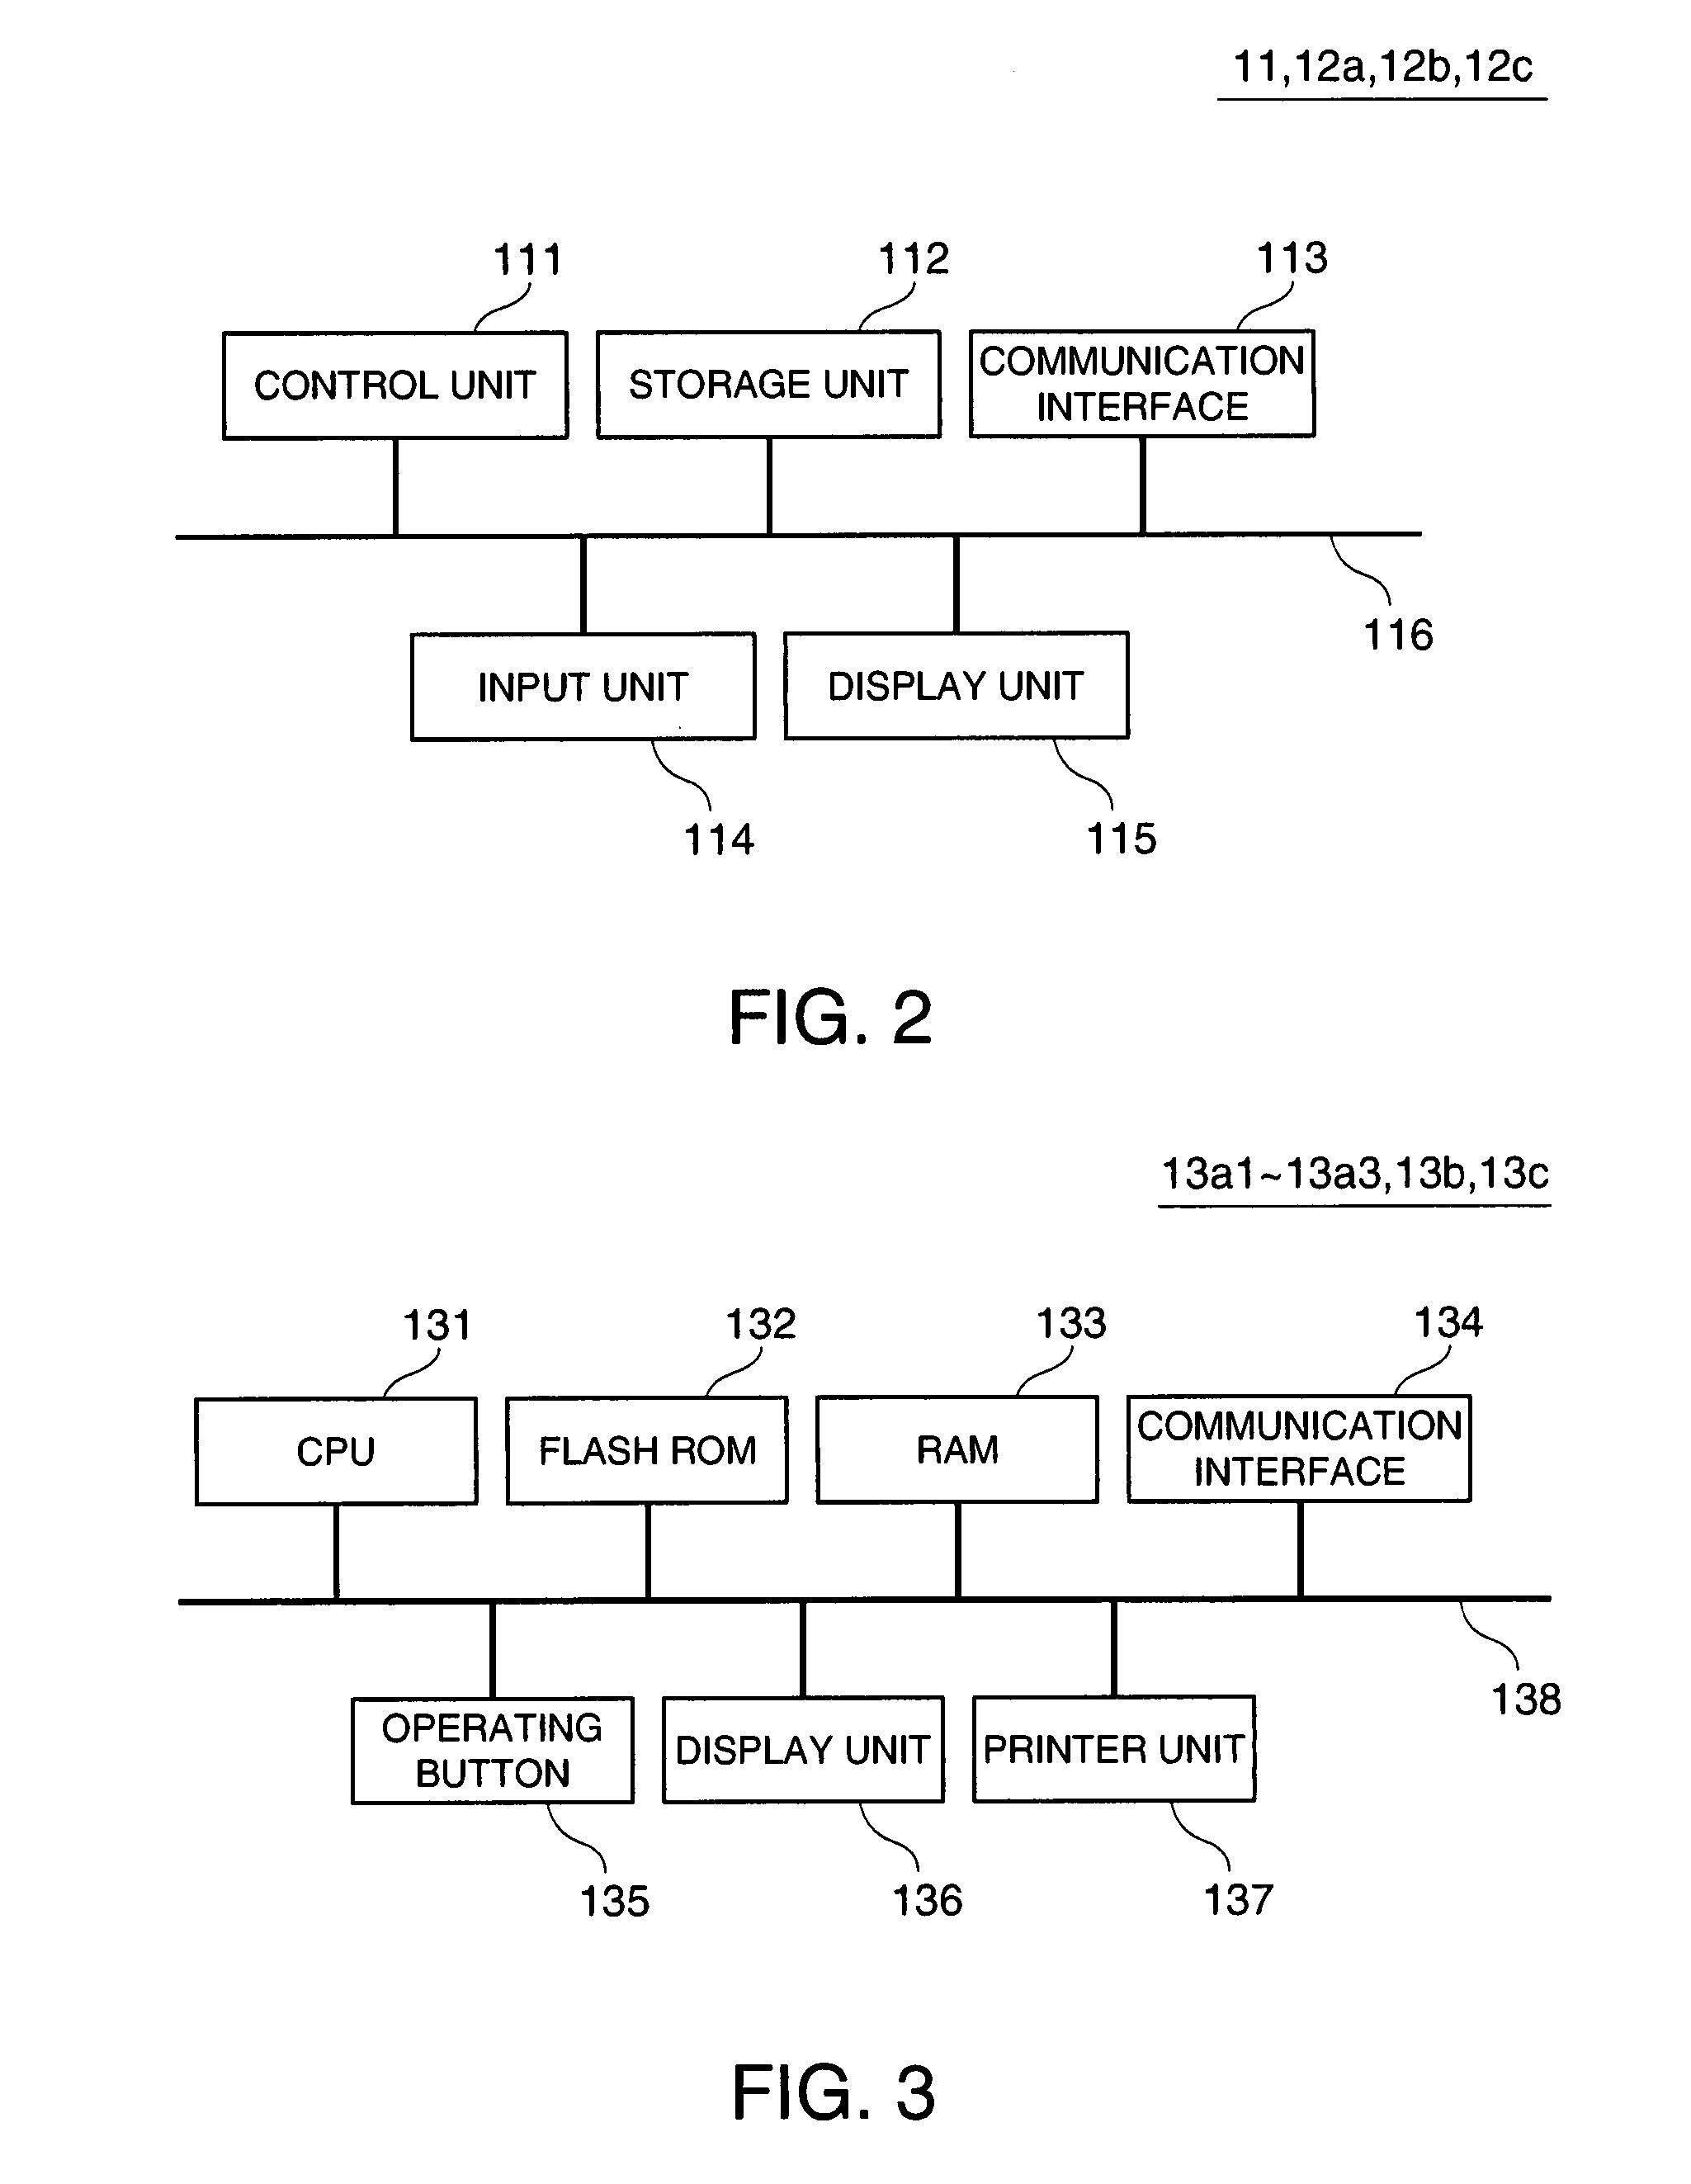 Method for executing a software updating process and computer for implementing the method